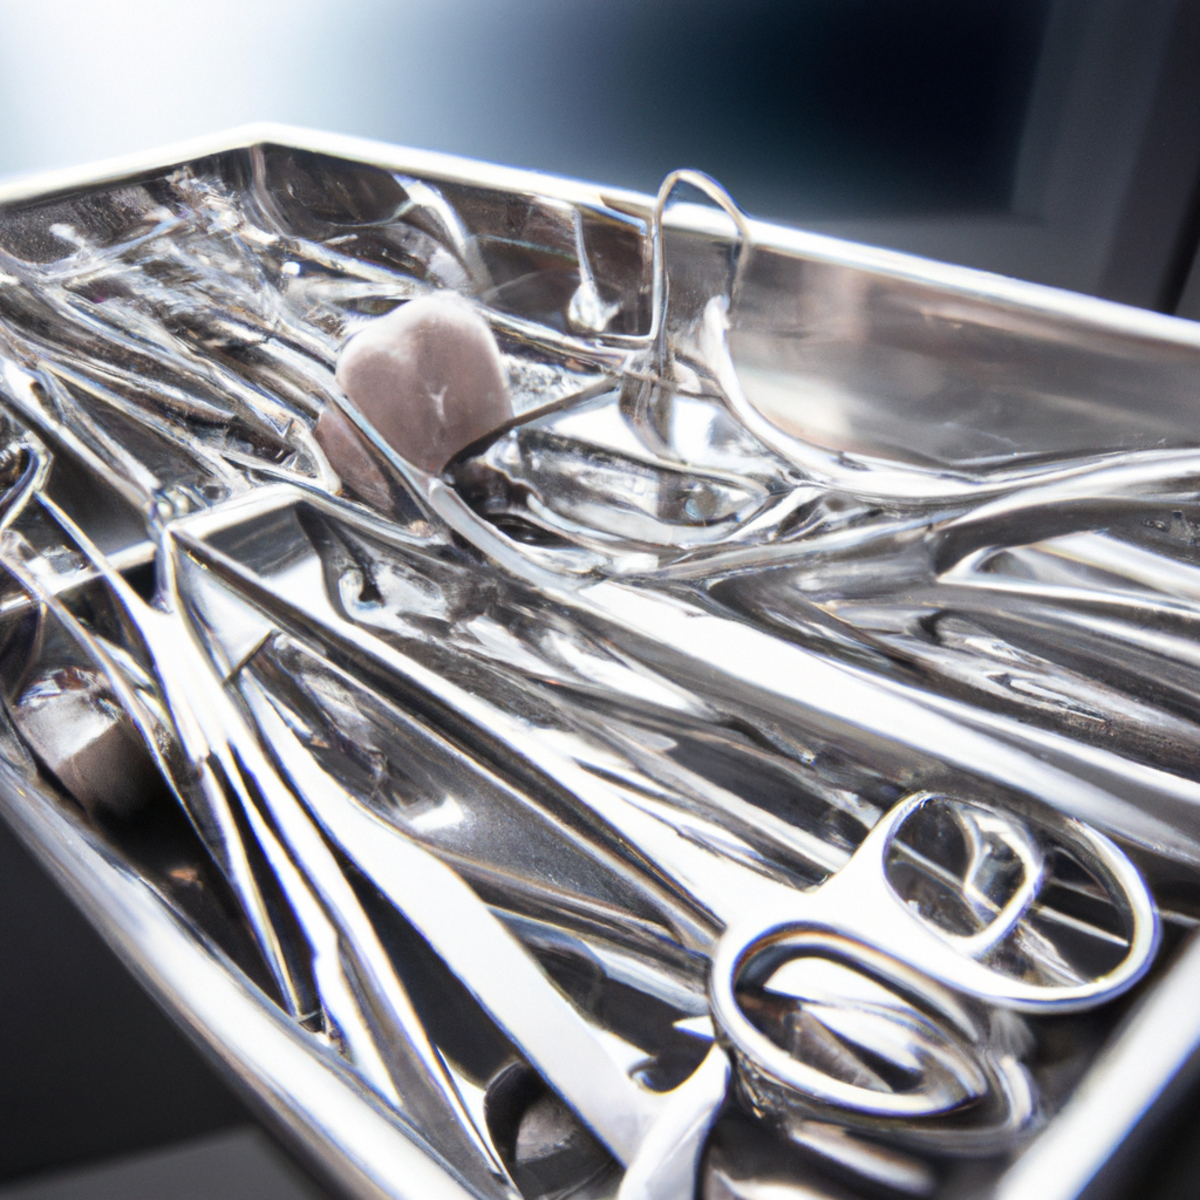 Close-up of surgical instrument tray in well-lit operating room, showcasing sterile medical tools for precise surgical procedures.